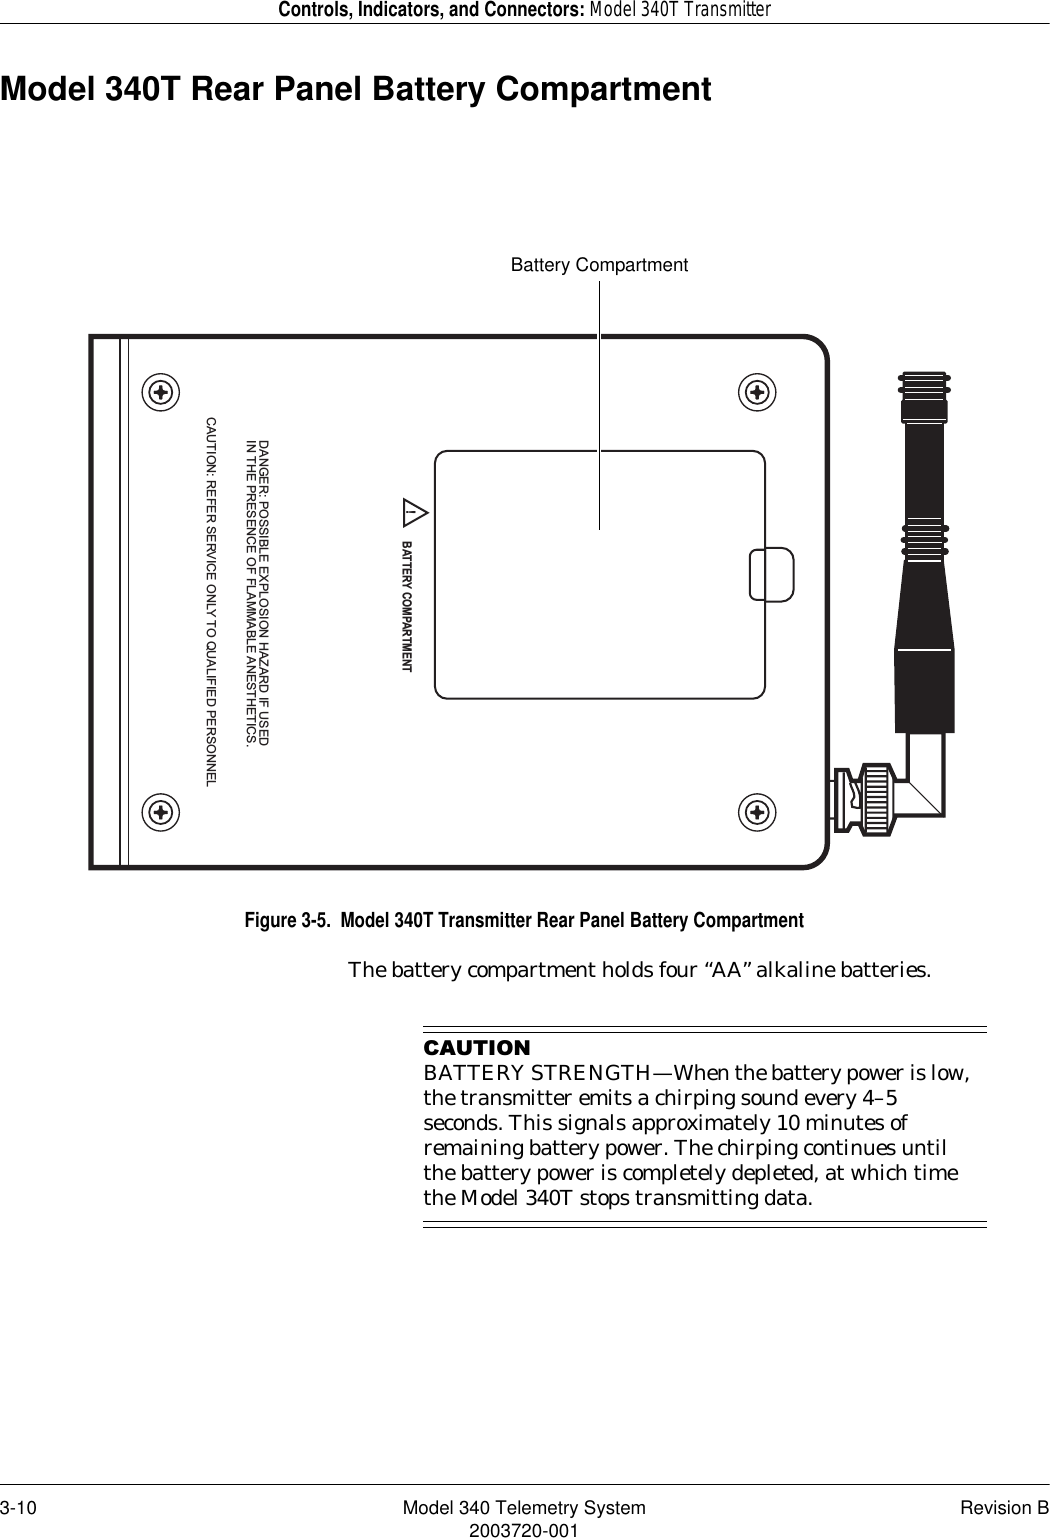 3-10 Model 340 Telemetry System Revision B2003720-001Controls, Indicators, and Connectors: Model 340T TransmitterModel 340T Rear Panel Battery CompartmentFigure 3-5.  Model 340T Transmitter Rear Panel Battery CompartmentThe battery compartment holds four “AA” alkaline batteries.&amp;$87,21BATTERY STRENGTH—When the battery power is low, the transmitter emits a chirping sound every 4–5 seconds. This signals approximately 10 minutes of remaining battery power. The chirping continues until the battery power is completely depleted, at which time the Model 340T stops transmitting data.DANGER: POSSIBLE EXPLOSION HAZARD IF USEDIN THE PRESENCE OF FLAMMABLE ANESTHETICS.CAUTION: REFER SERVICE ONLY TO QUALIFIED PERSONNEL!BATTERY COMPARTMENTBattery Compartment